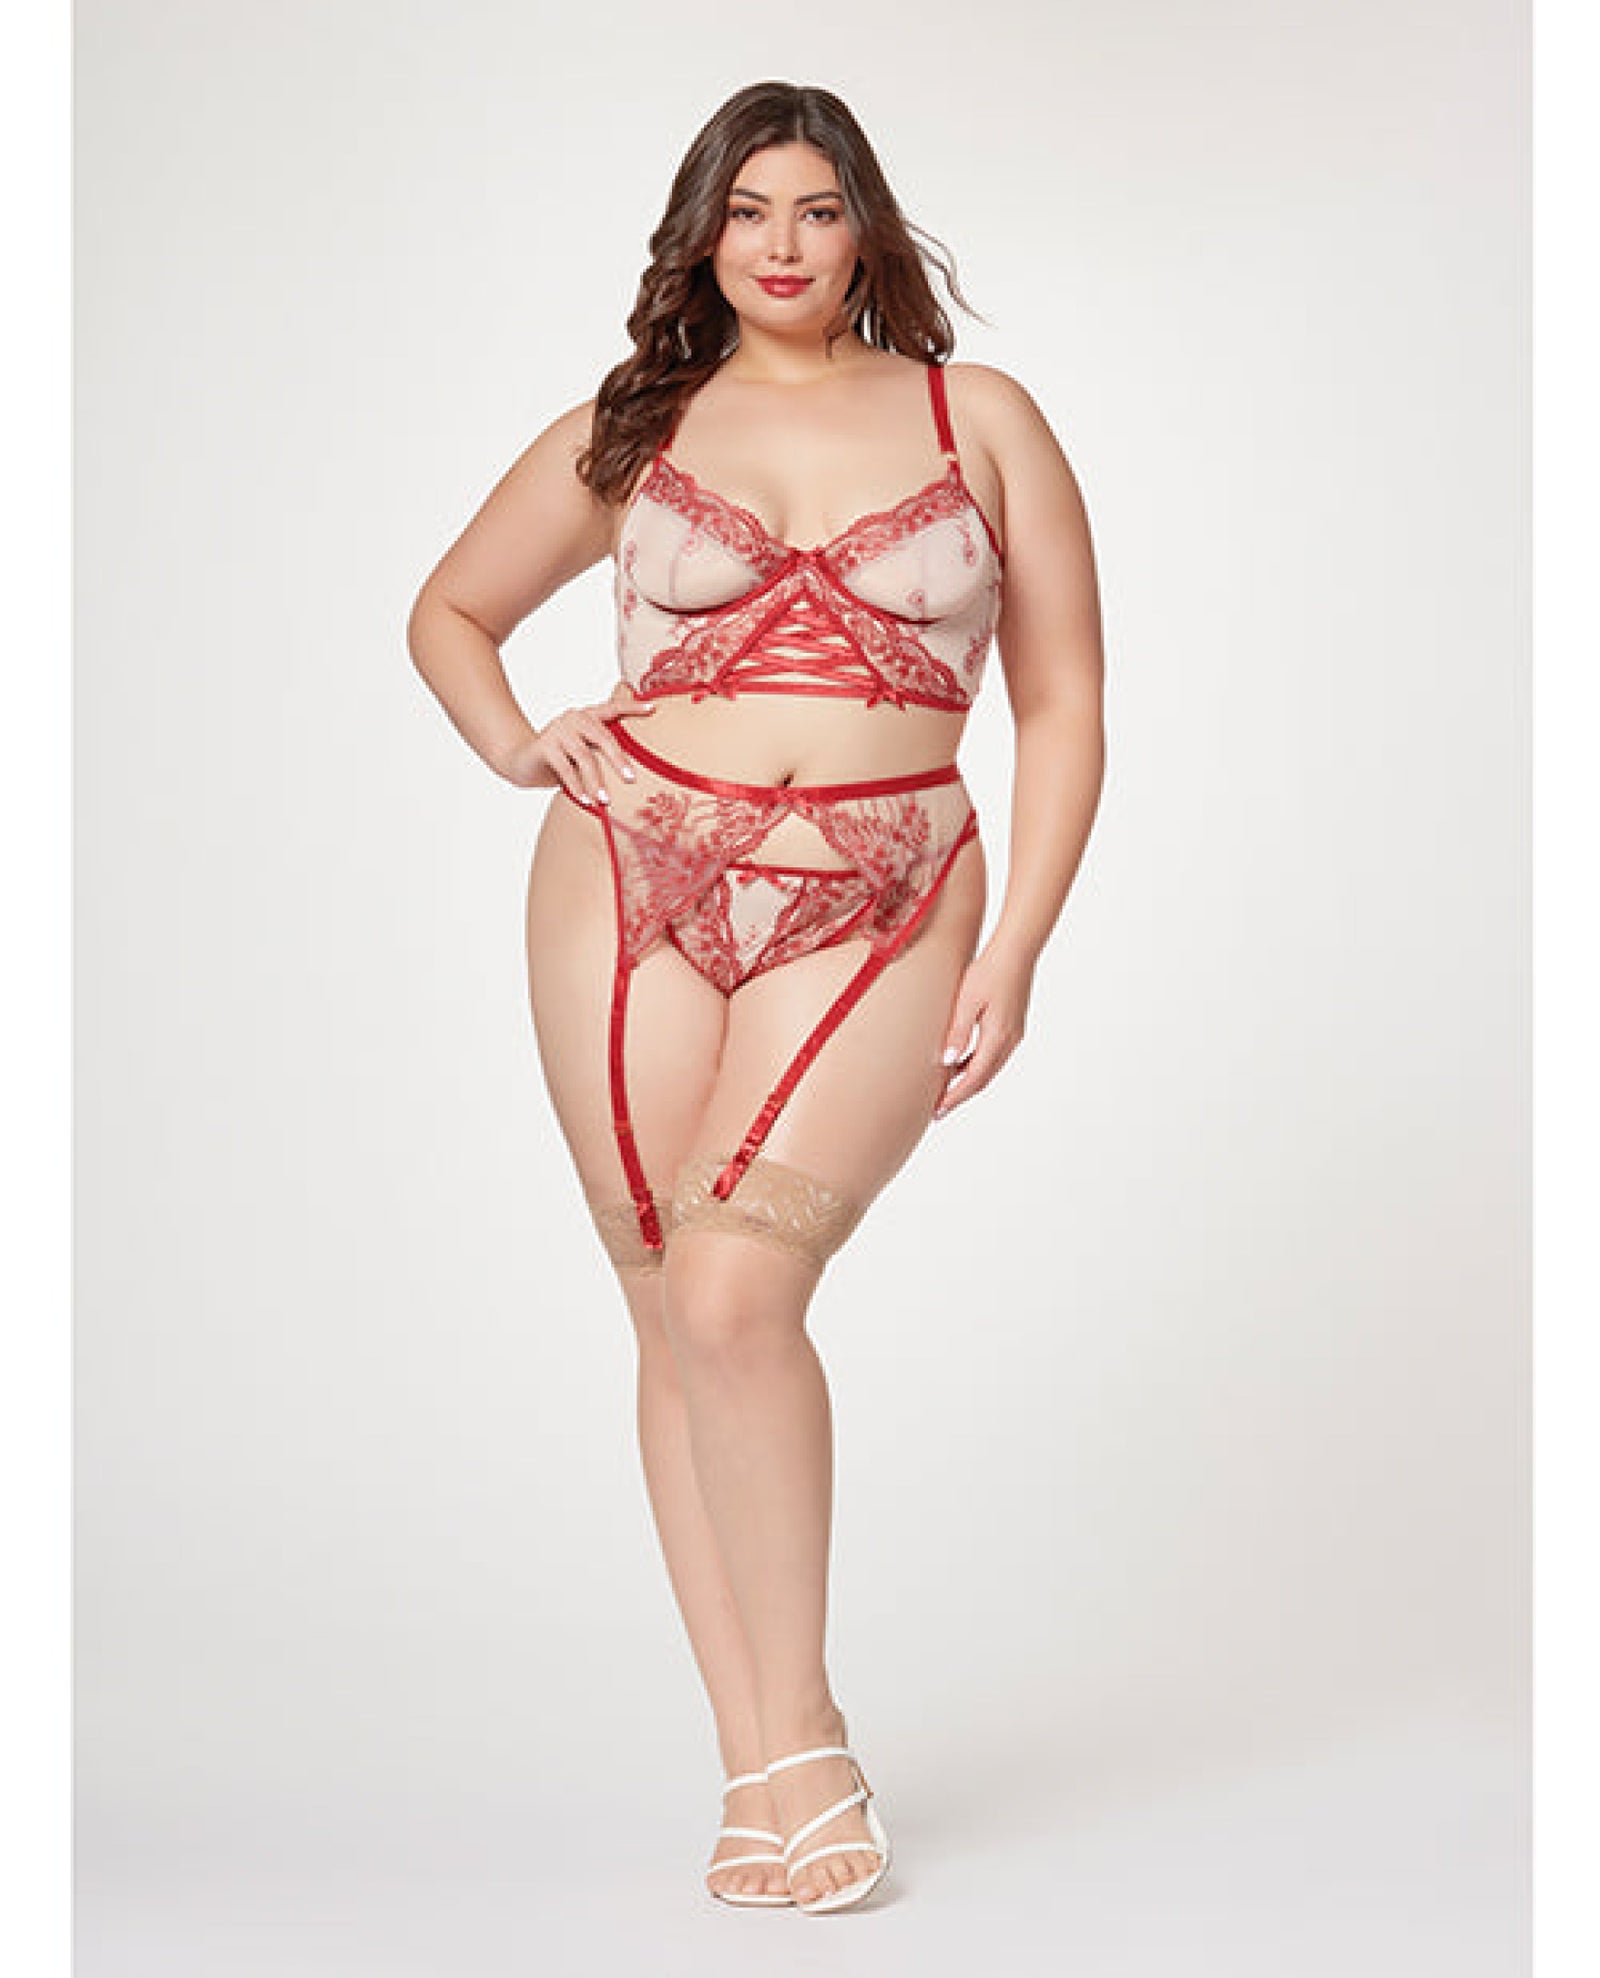 Sheer Stretch Mesh W/floral Contrast Embroidery Bustier, Garter Belt & Thong Red/nude Seven 'til Midnight Costume